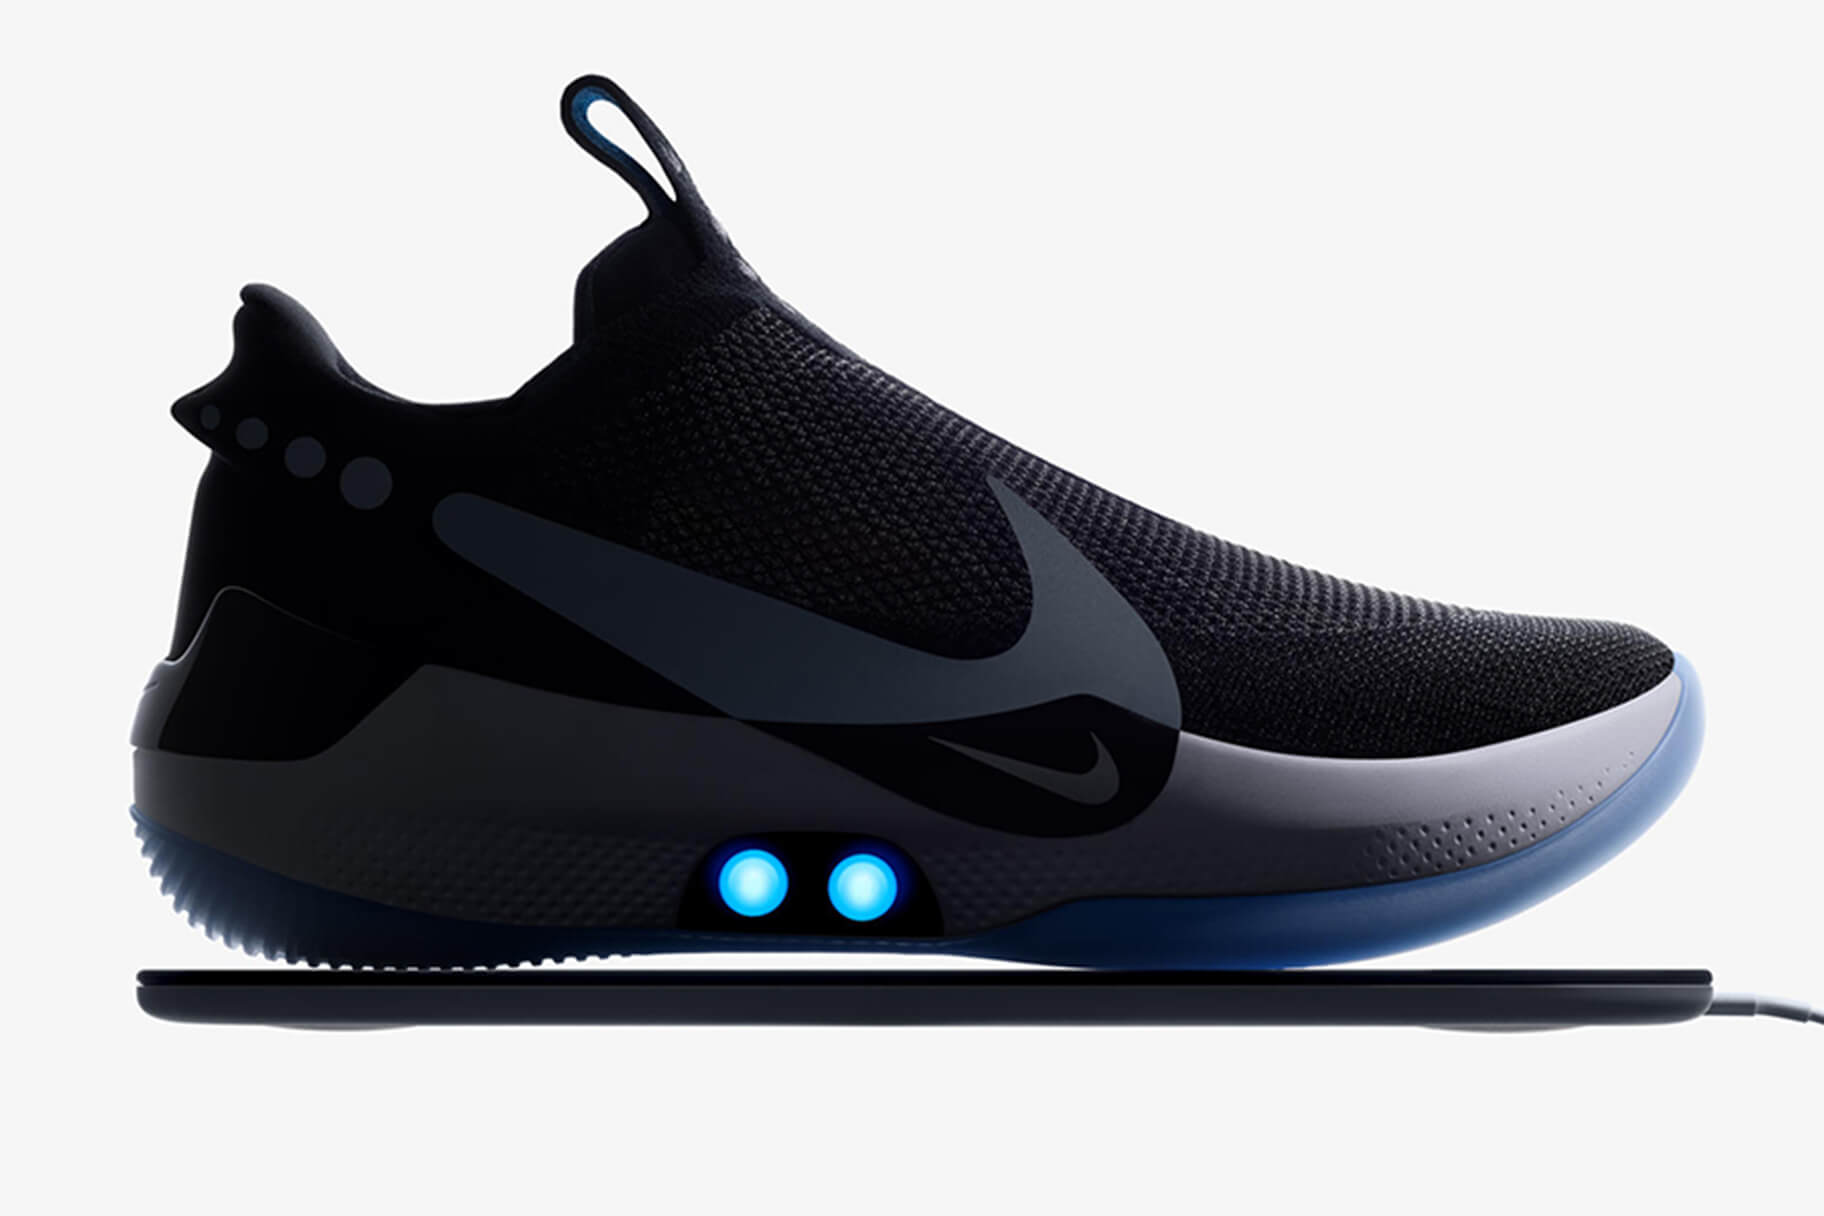 Nike launches Adapt BB, a self-lacing basketball shoe